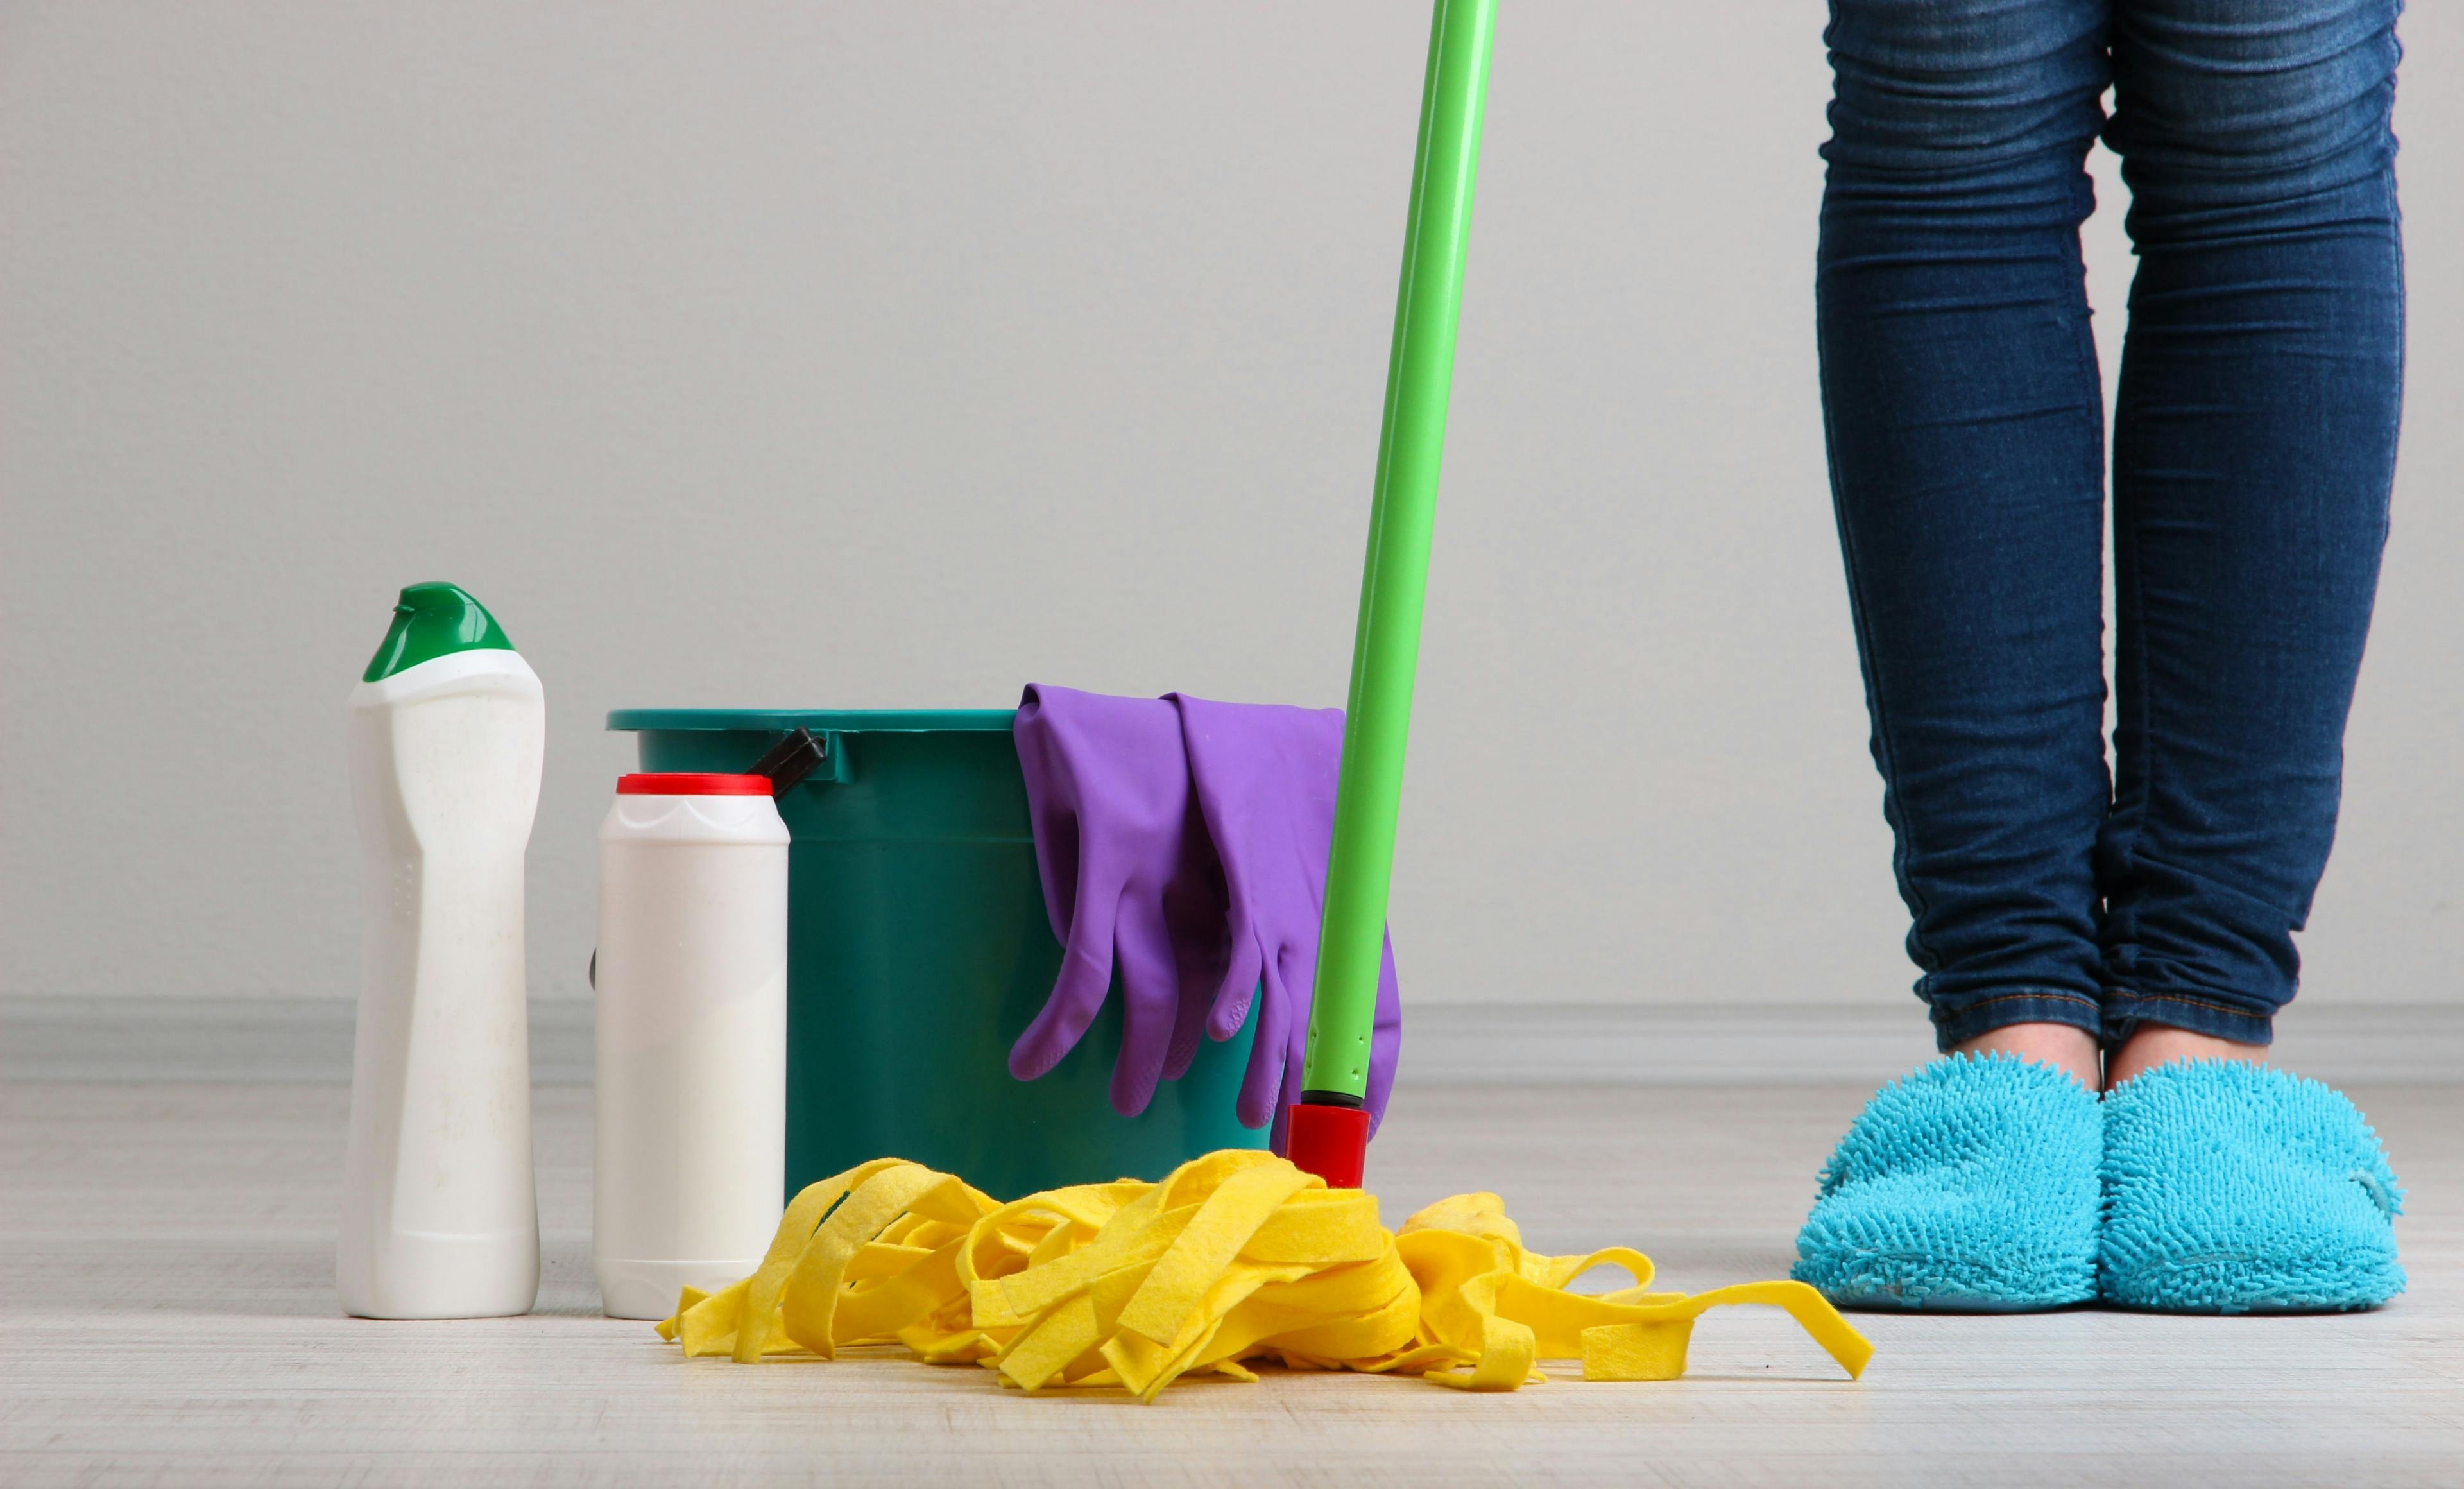 General Home Cleaning - StringsSG